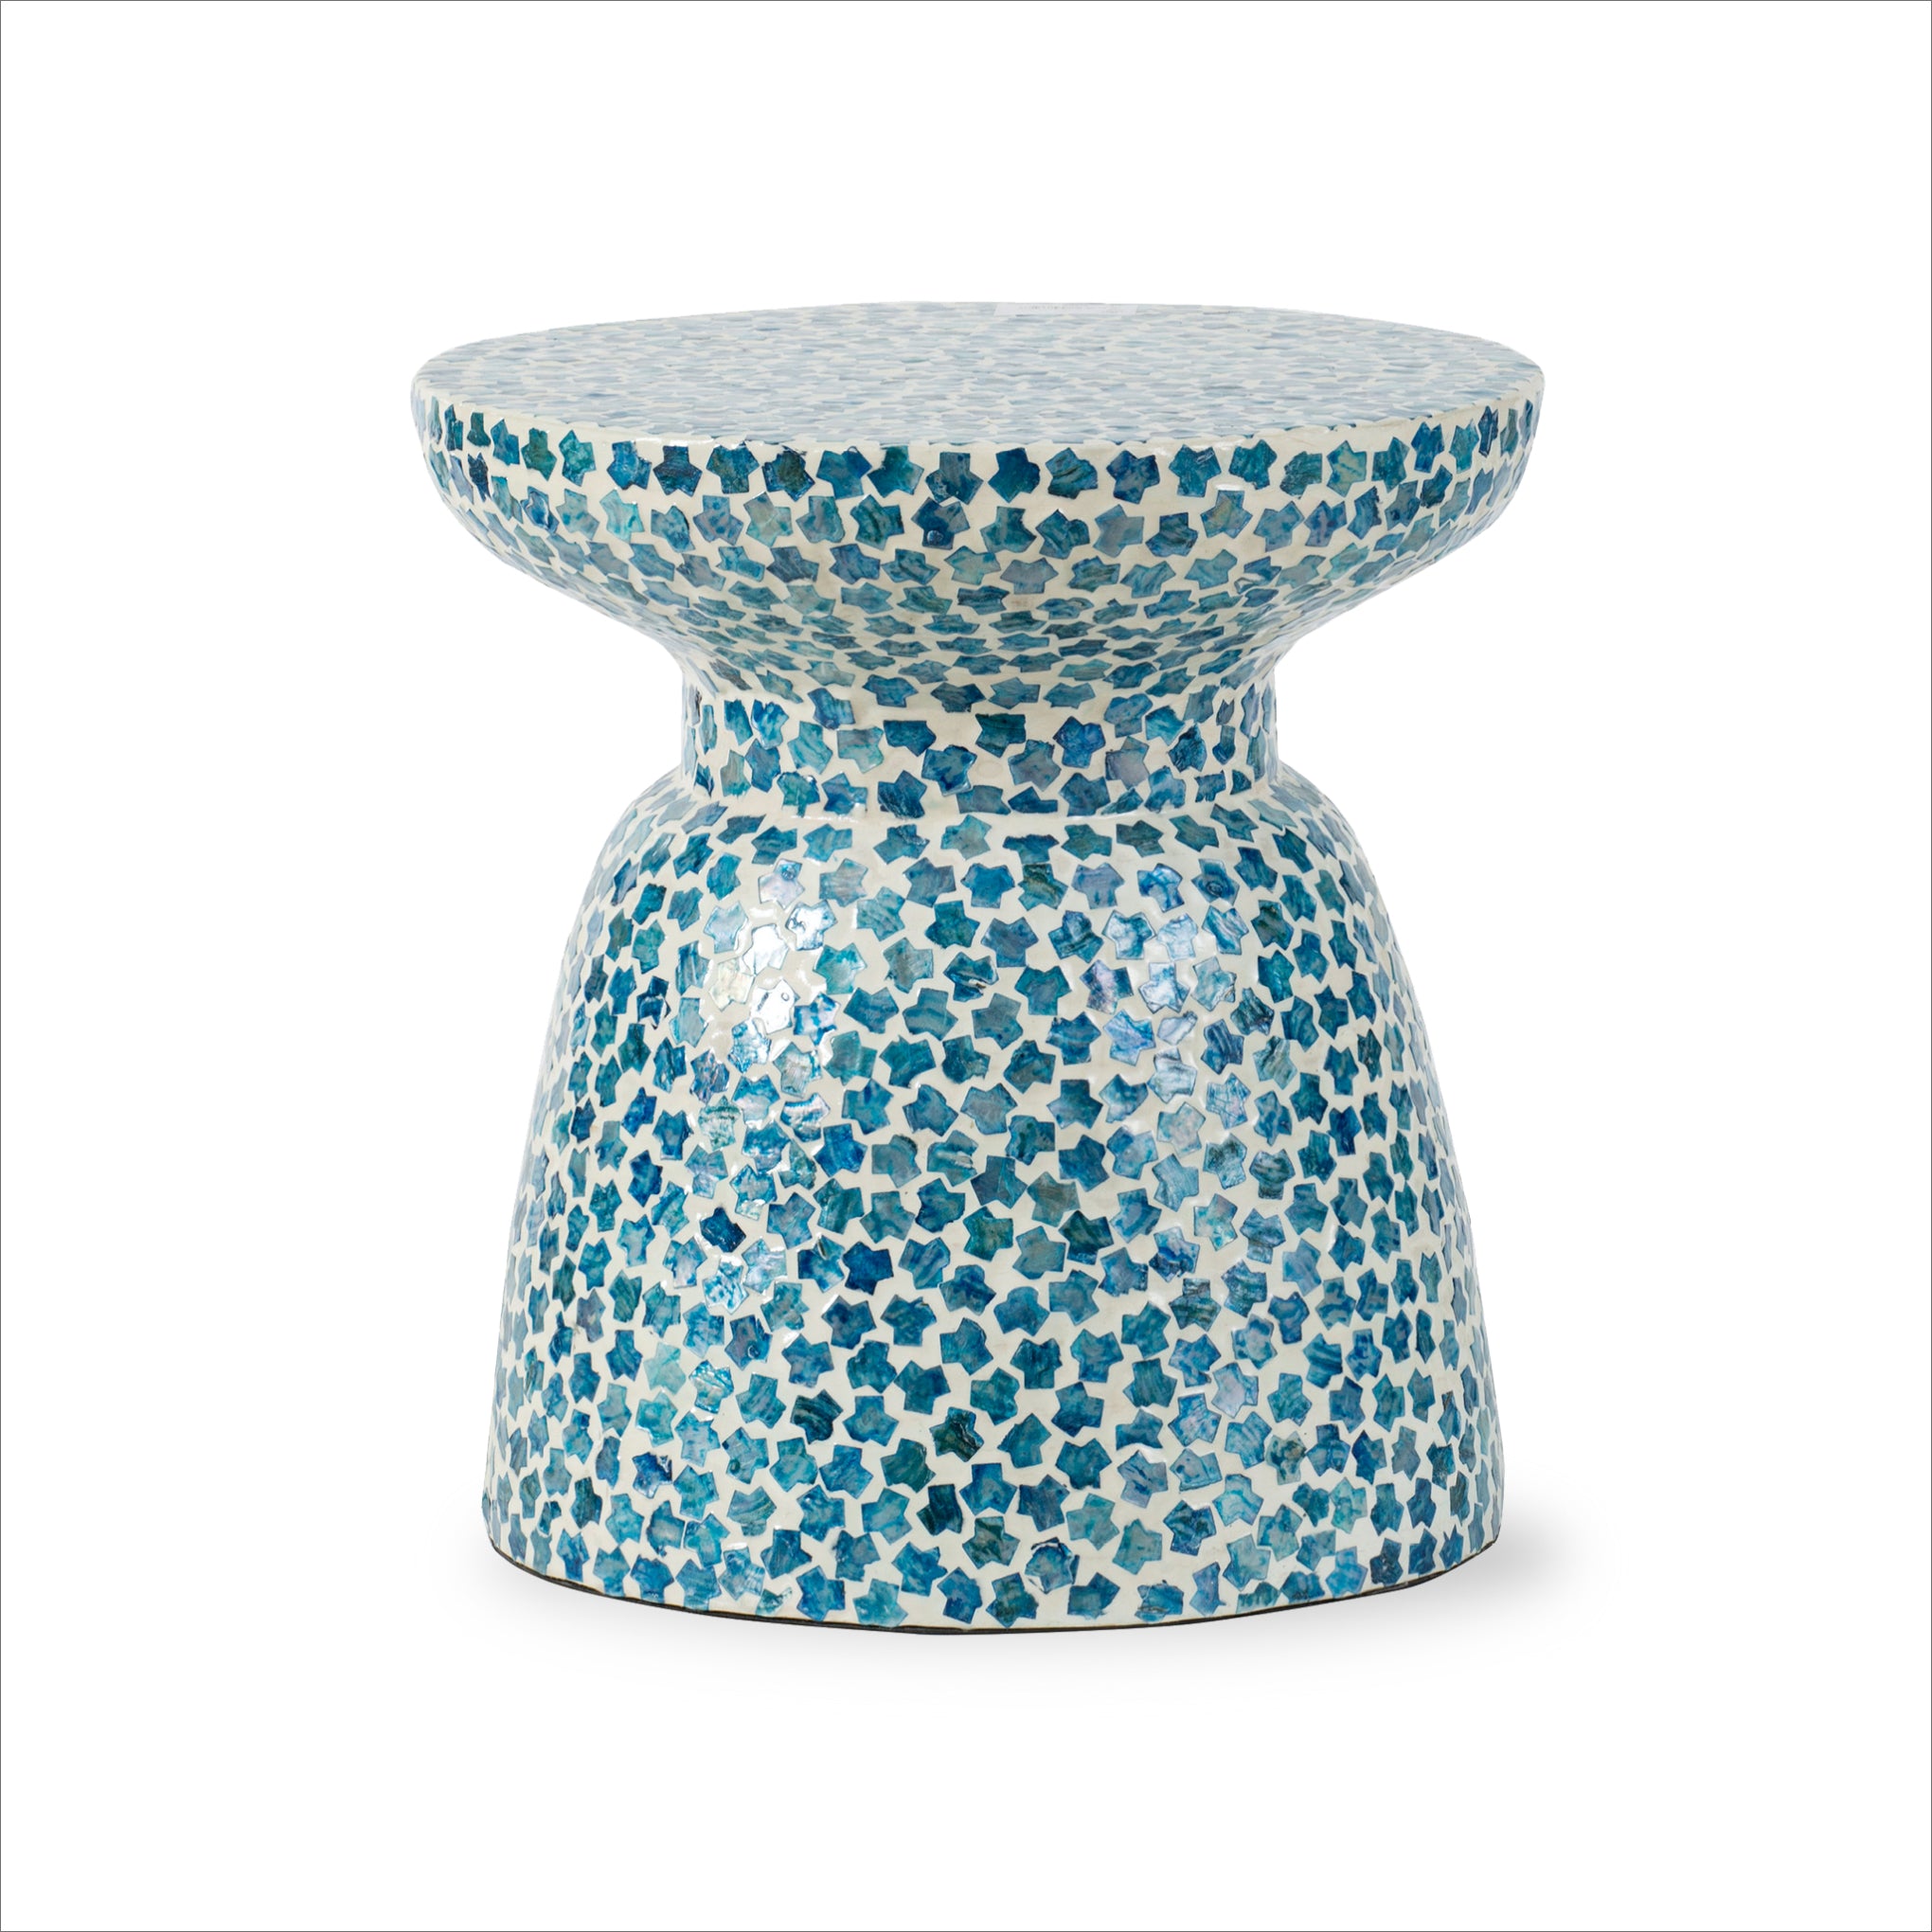 Chalice Tiled Stool